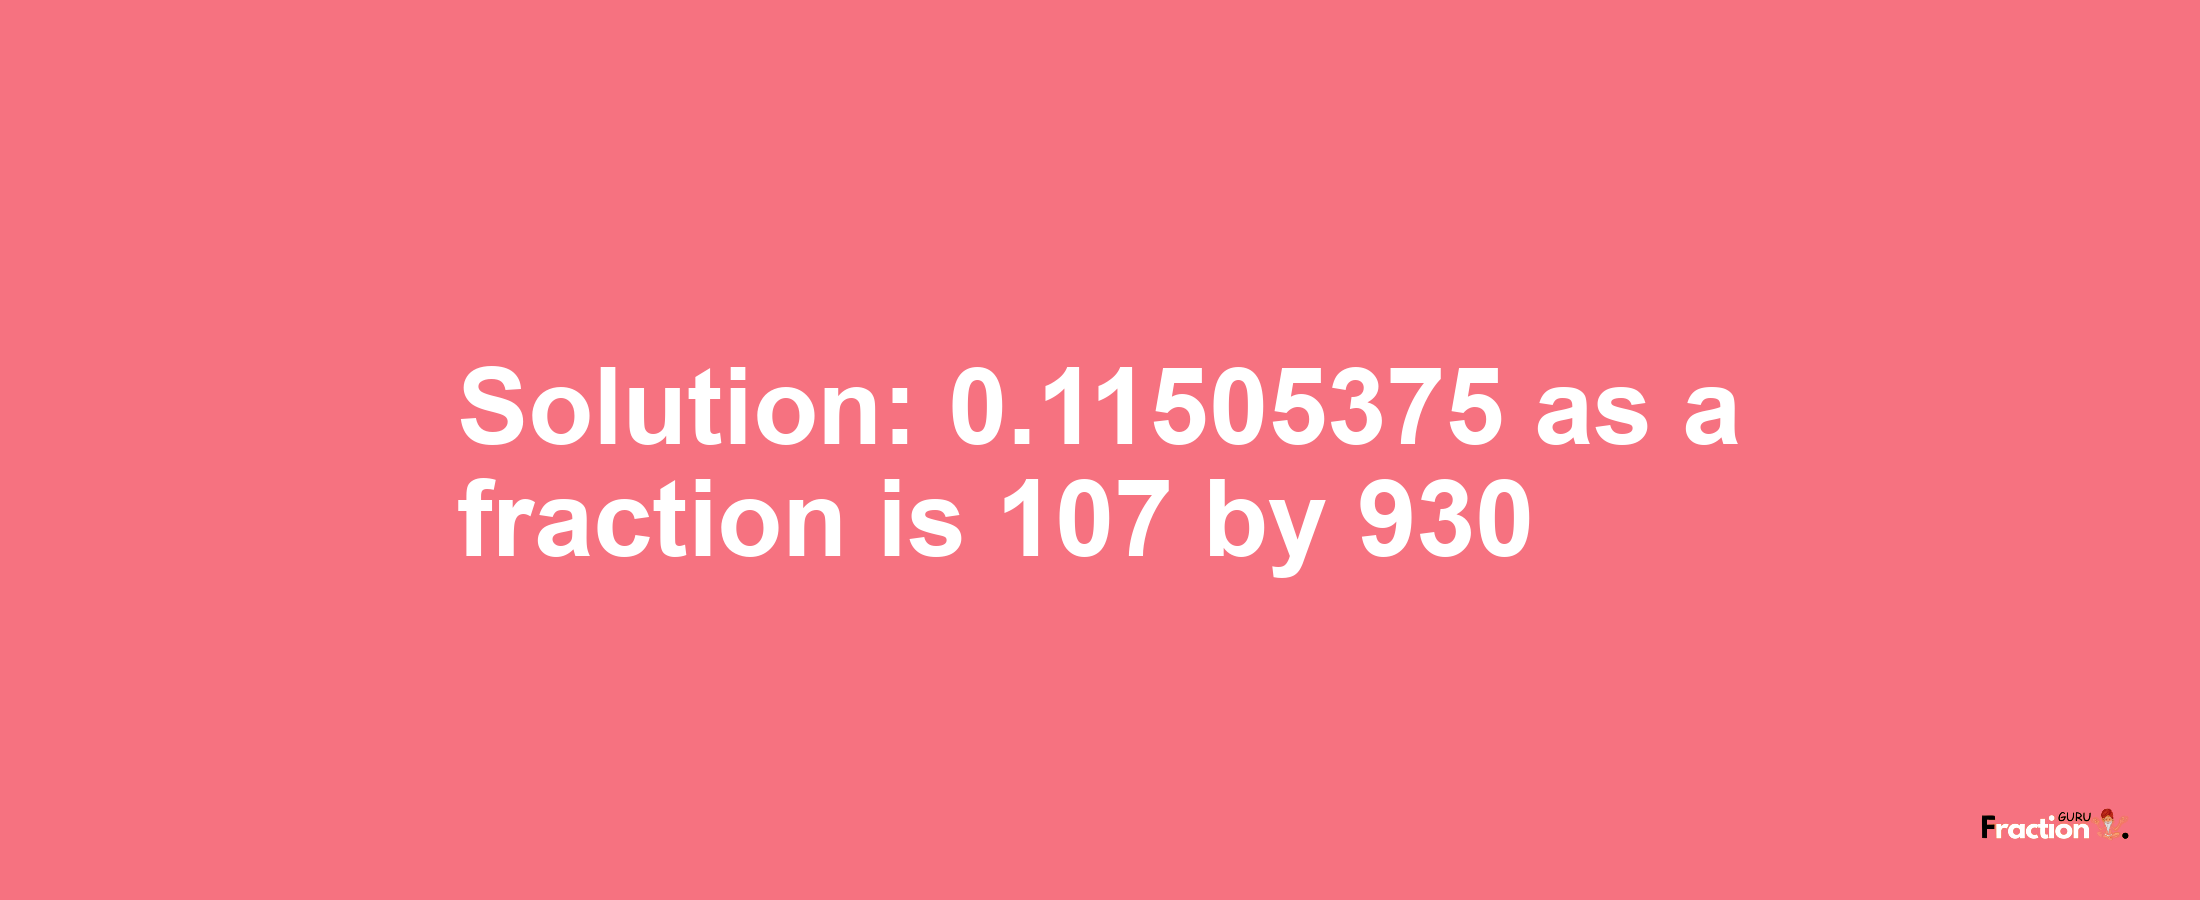 Solution:0.11505375 as a fraction is 107/930